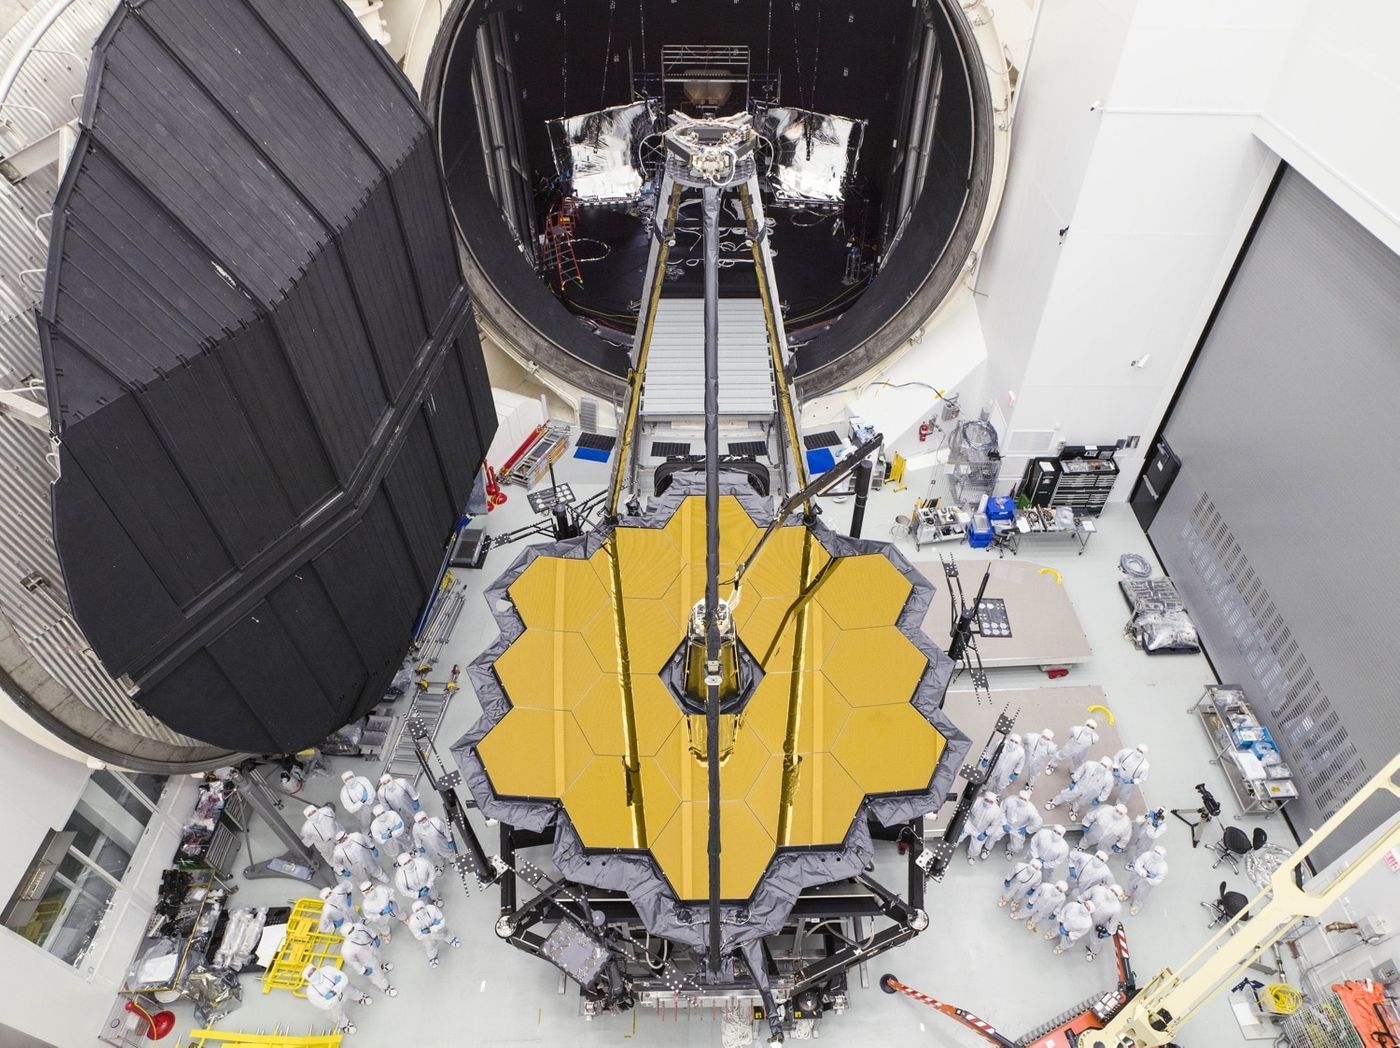 Engineers stand next to the massive heart of the James Webb Space Telescope after removing it from NASA's Chamber A testing facility in Houston, Texas.